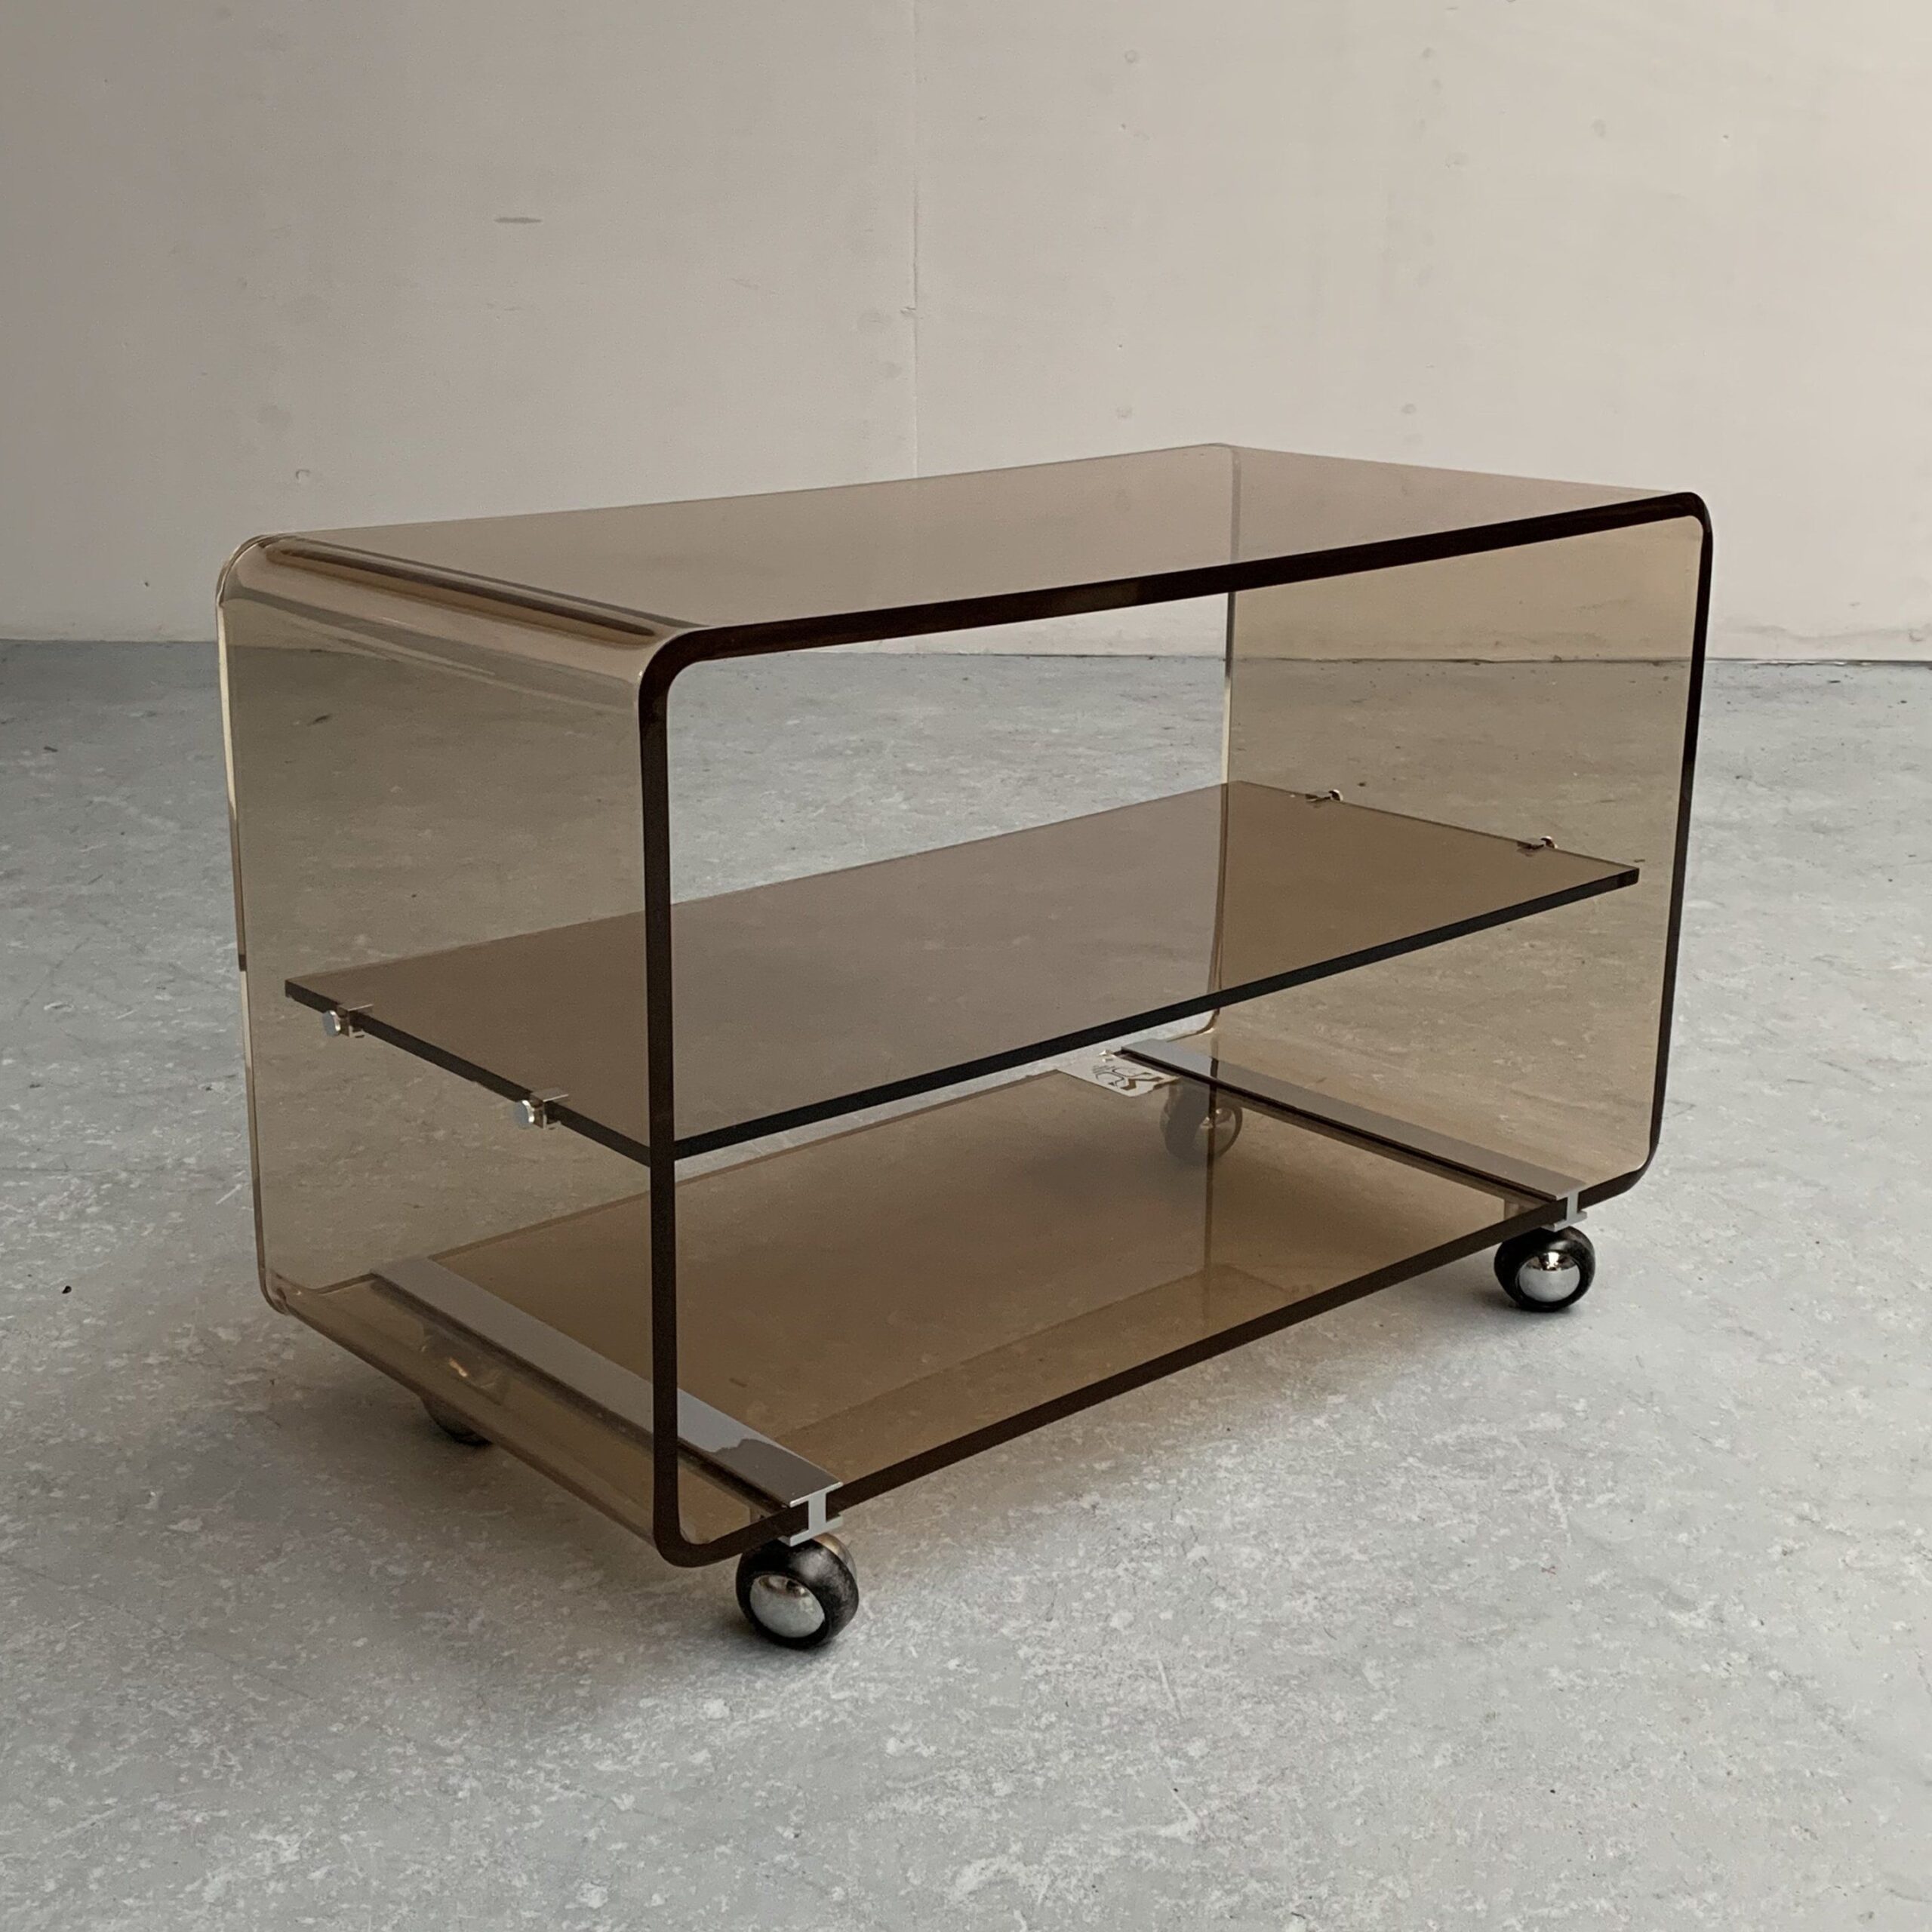 Lucite Furniture for Contemporary Home Setting